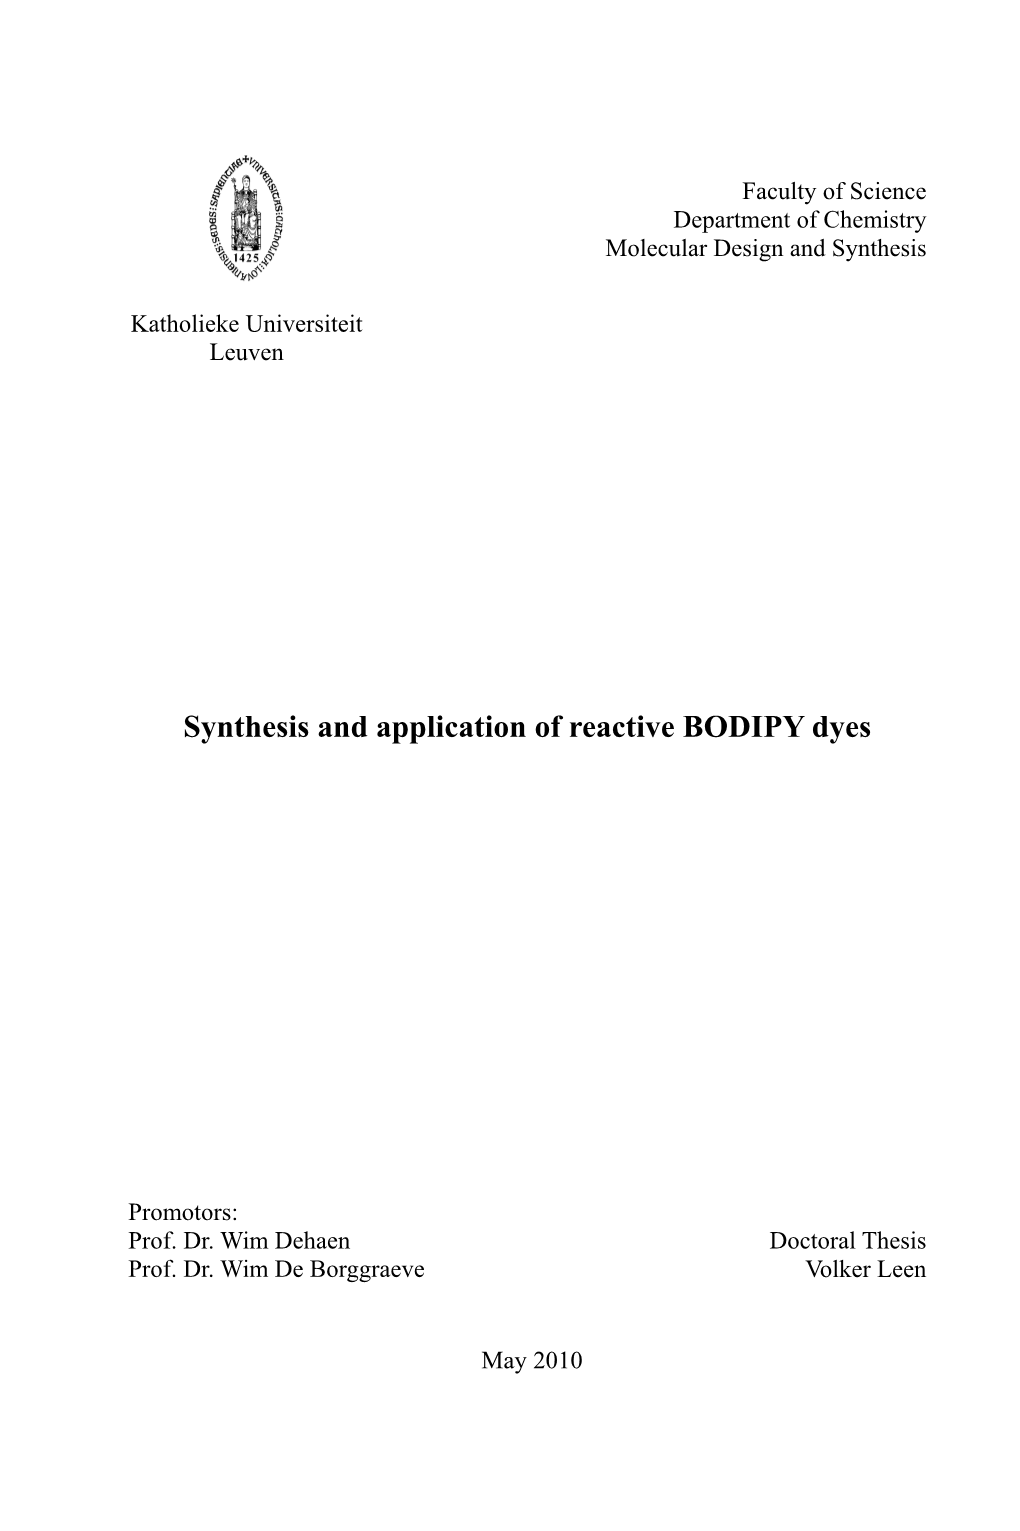 Synthesis and Application of Reactive BODIPY Dyes